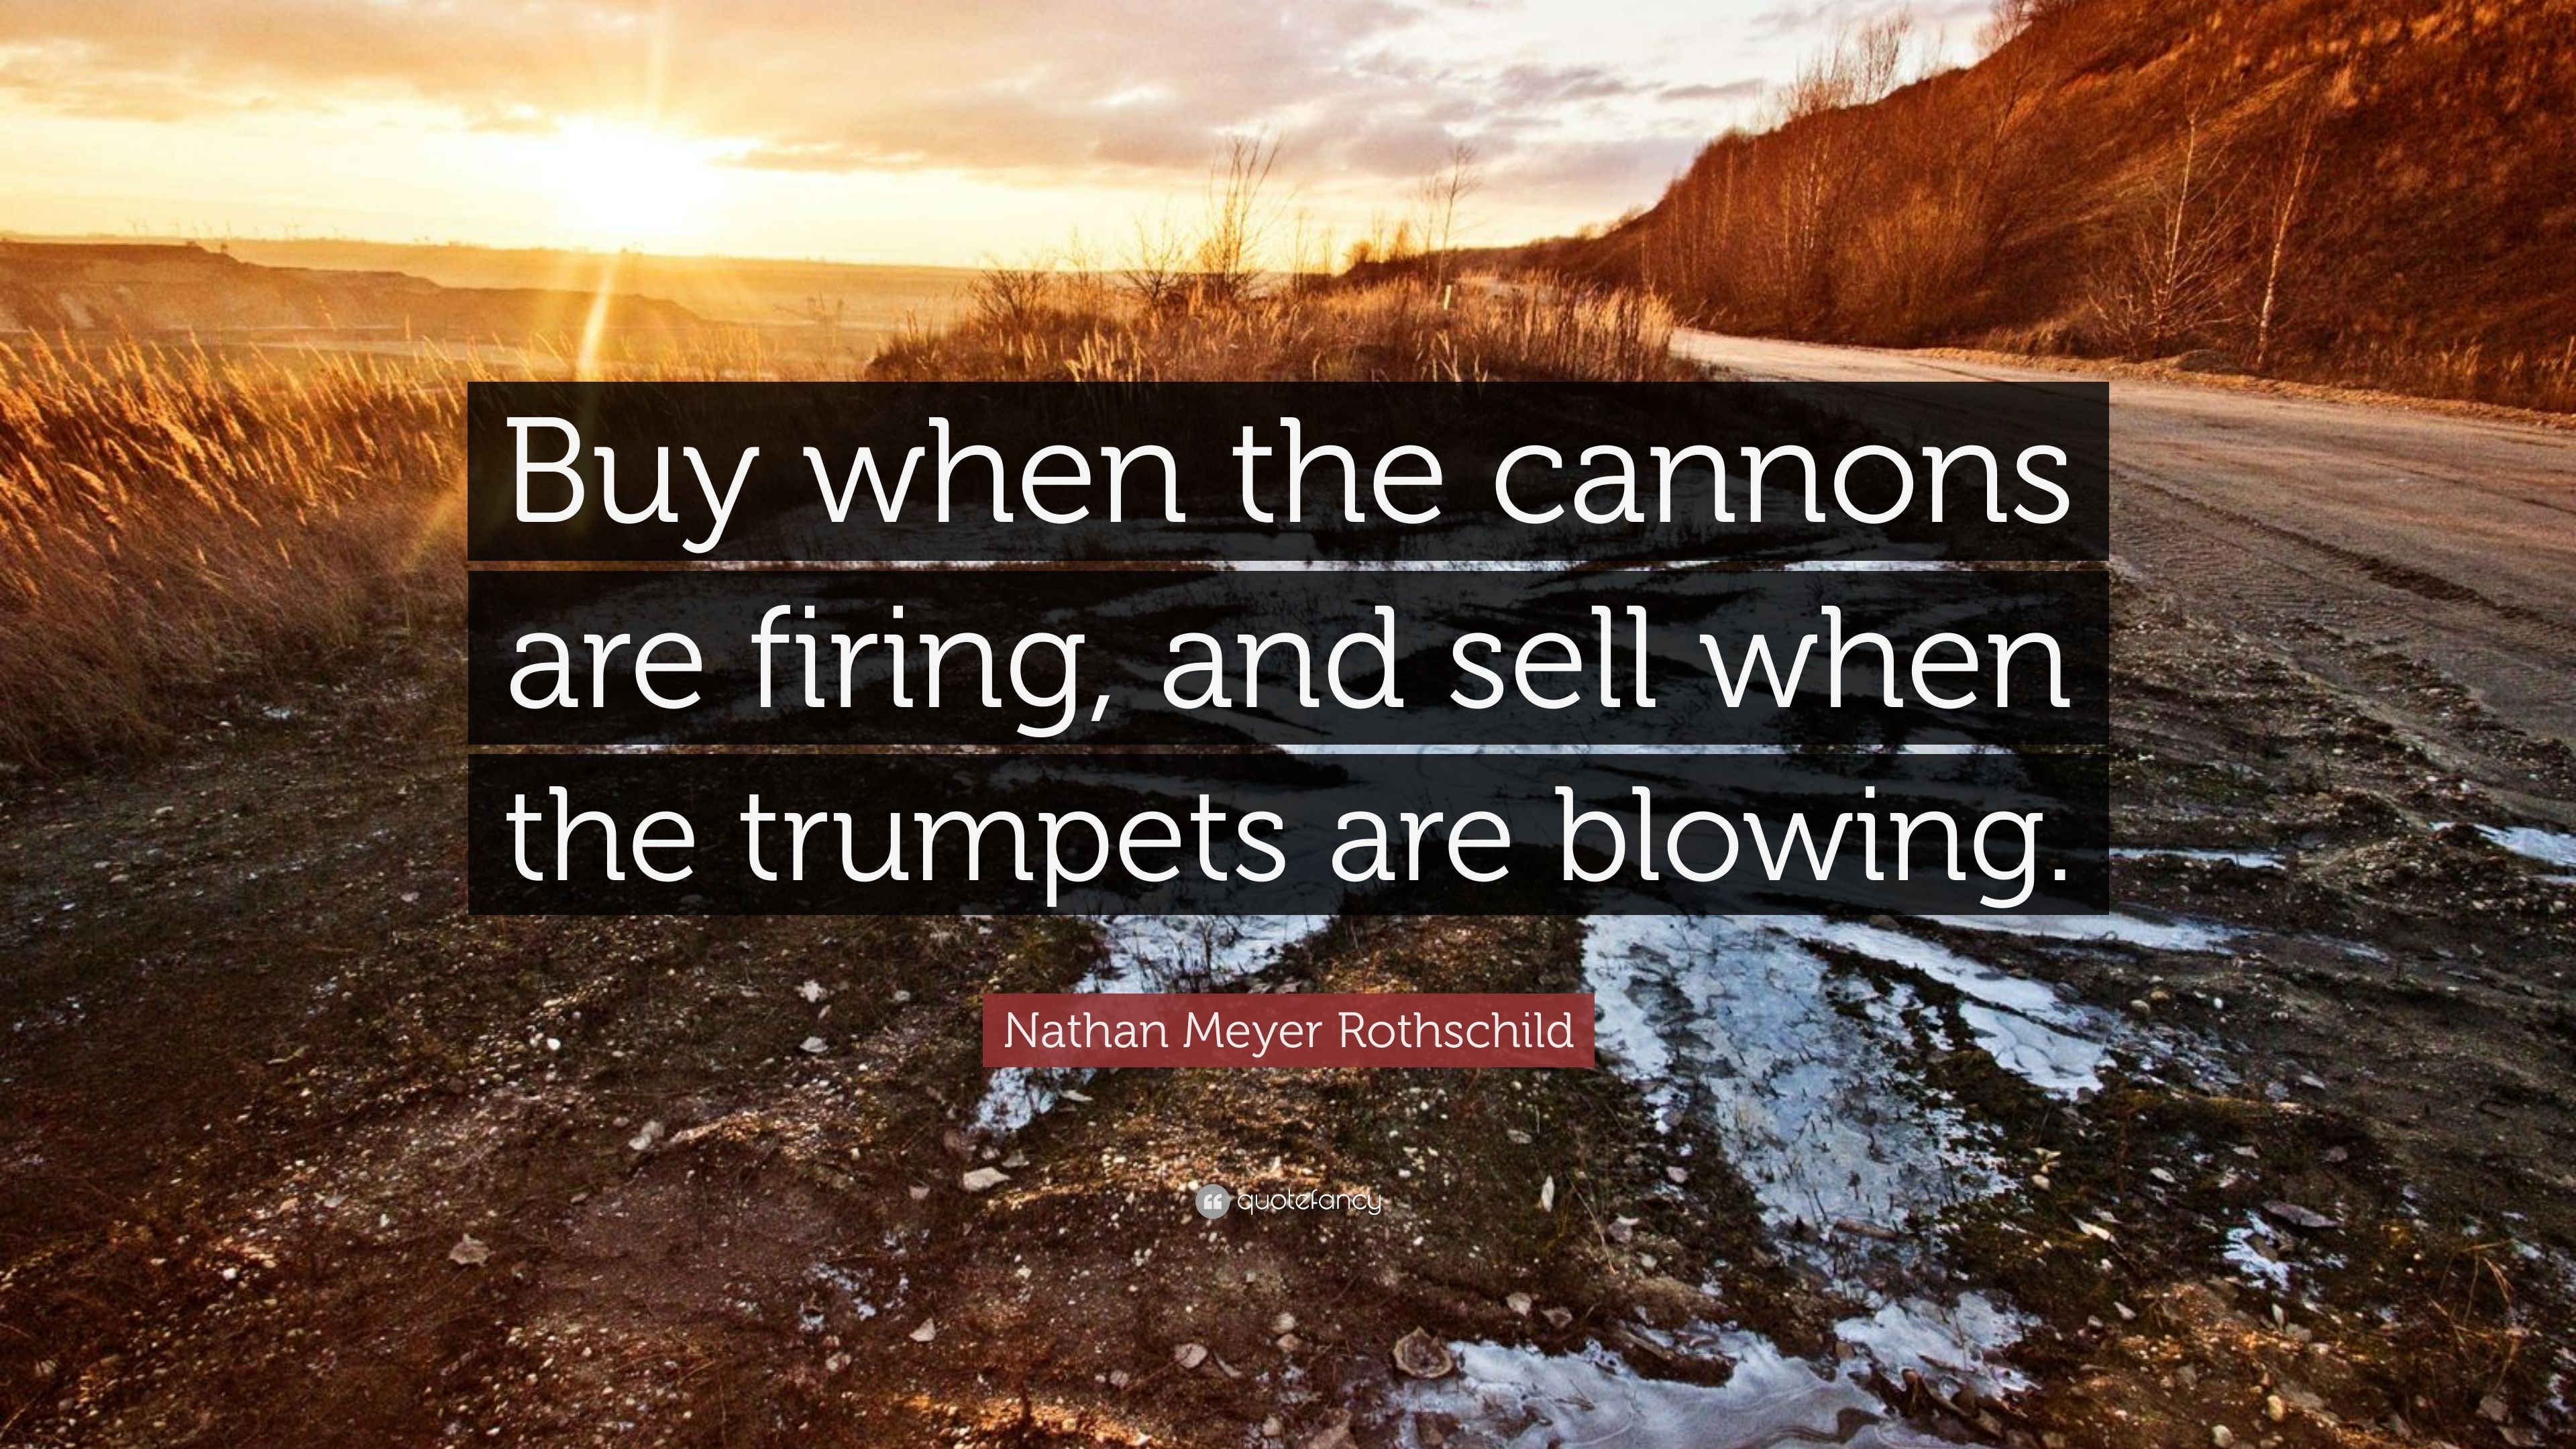 Nathan Meyer Rothschild Quote: “Buy when the cannons are firing, and sell when the trumpets are blowing.” (9 wallpaper)